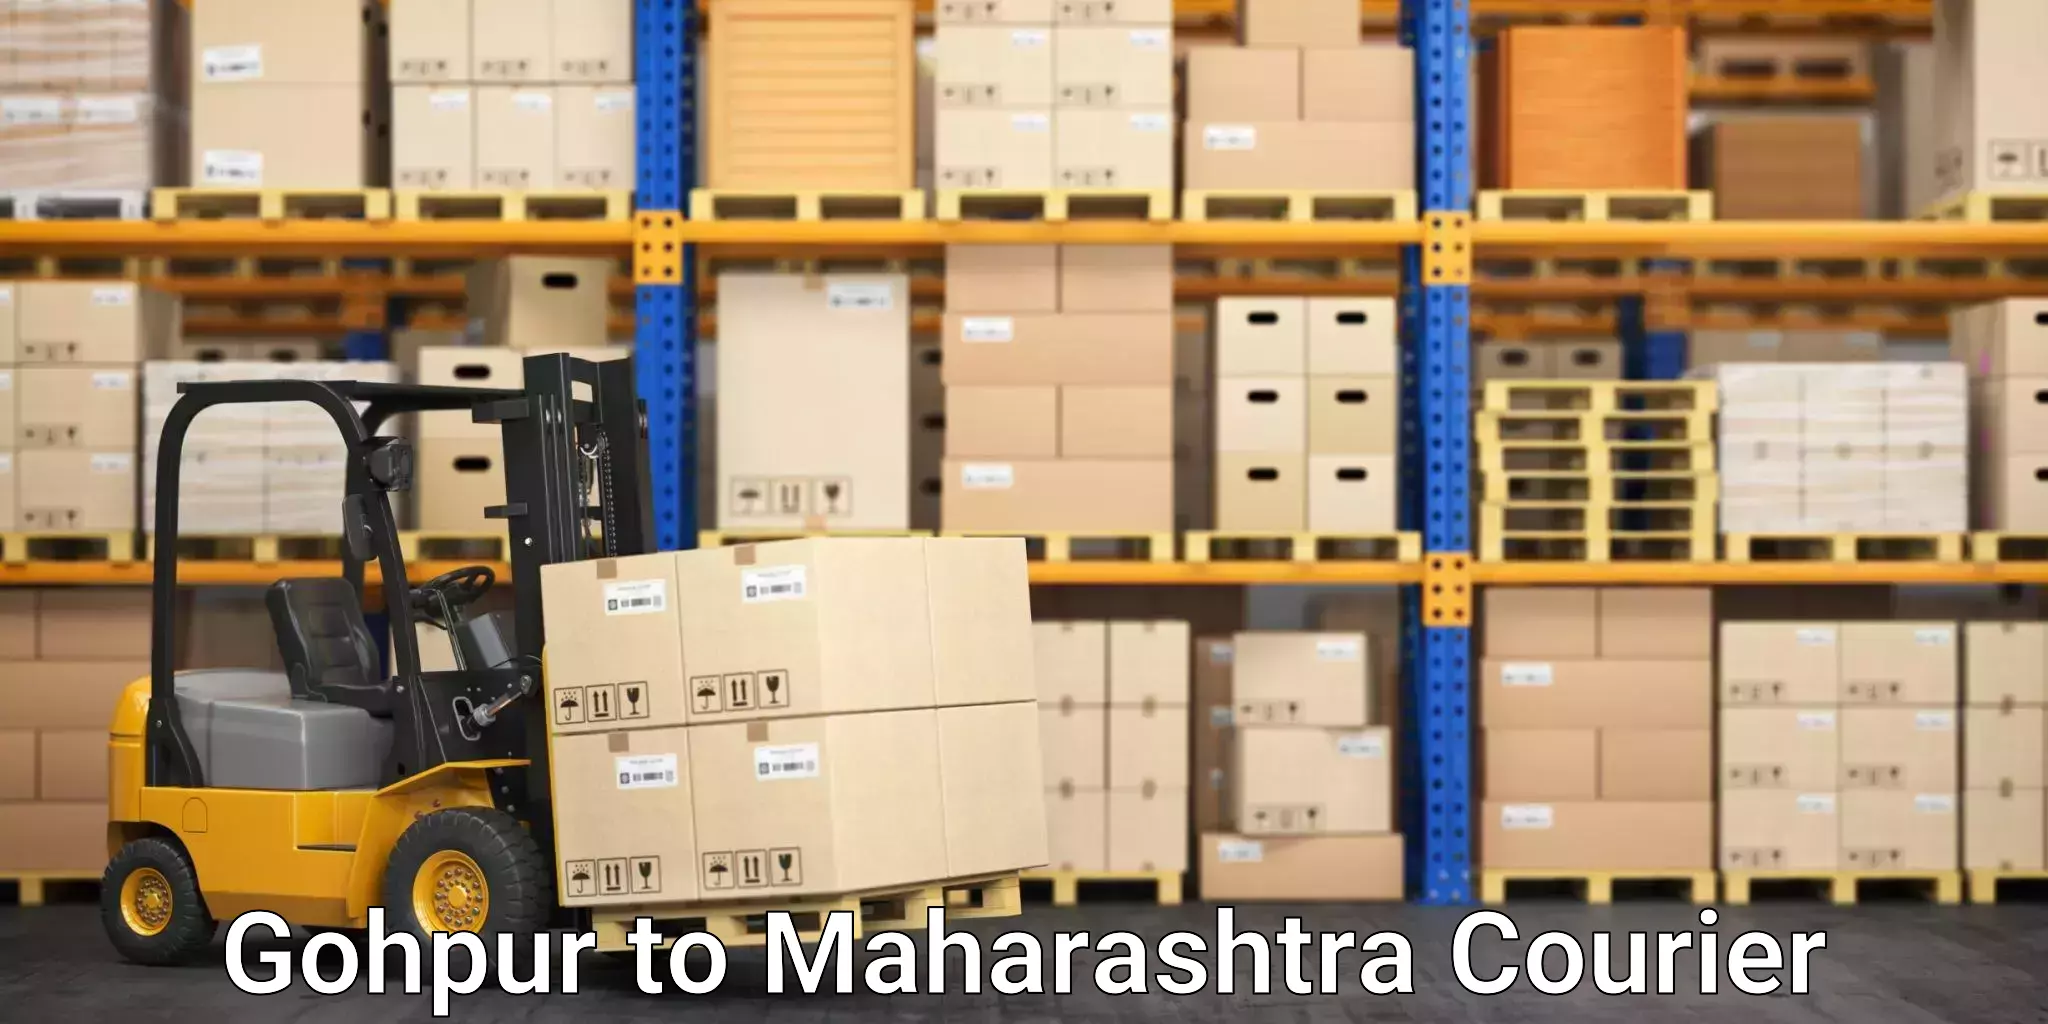 Nationwide shipping services Gohpur to IIIT Pune